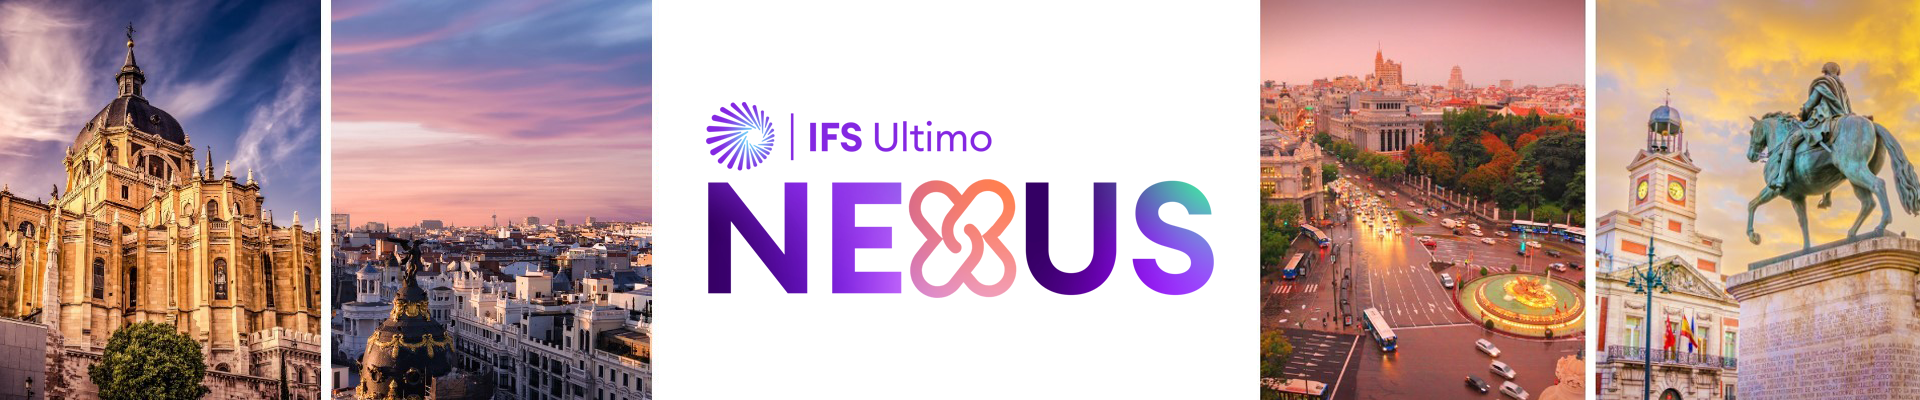 IFS Ultimo Partner Event